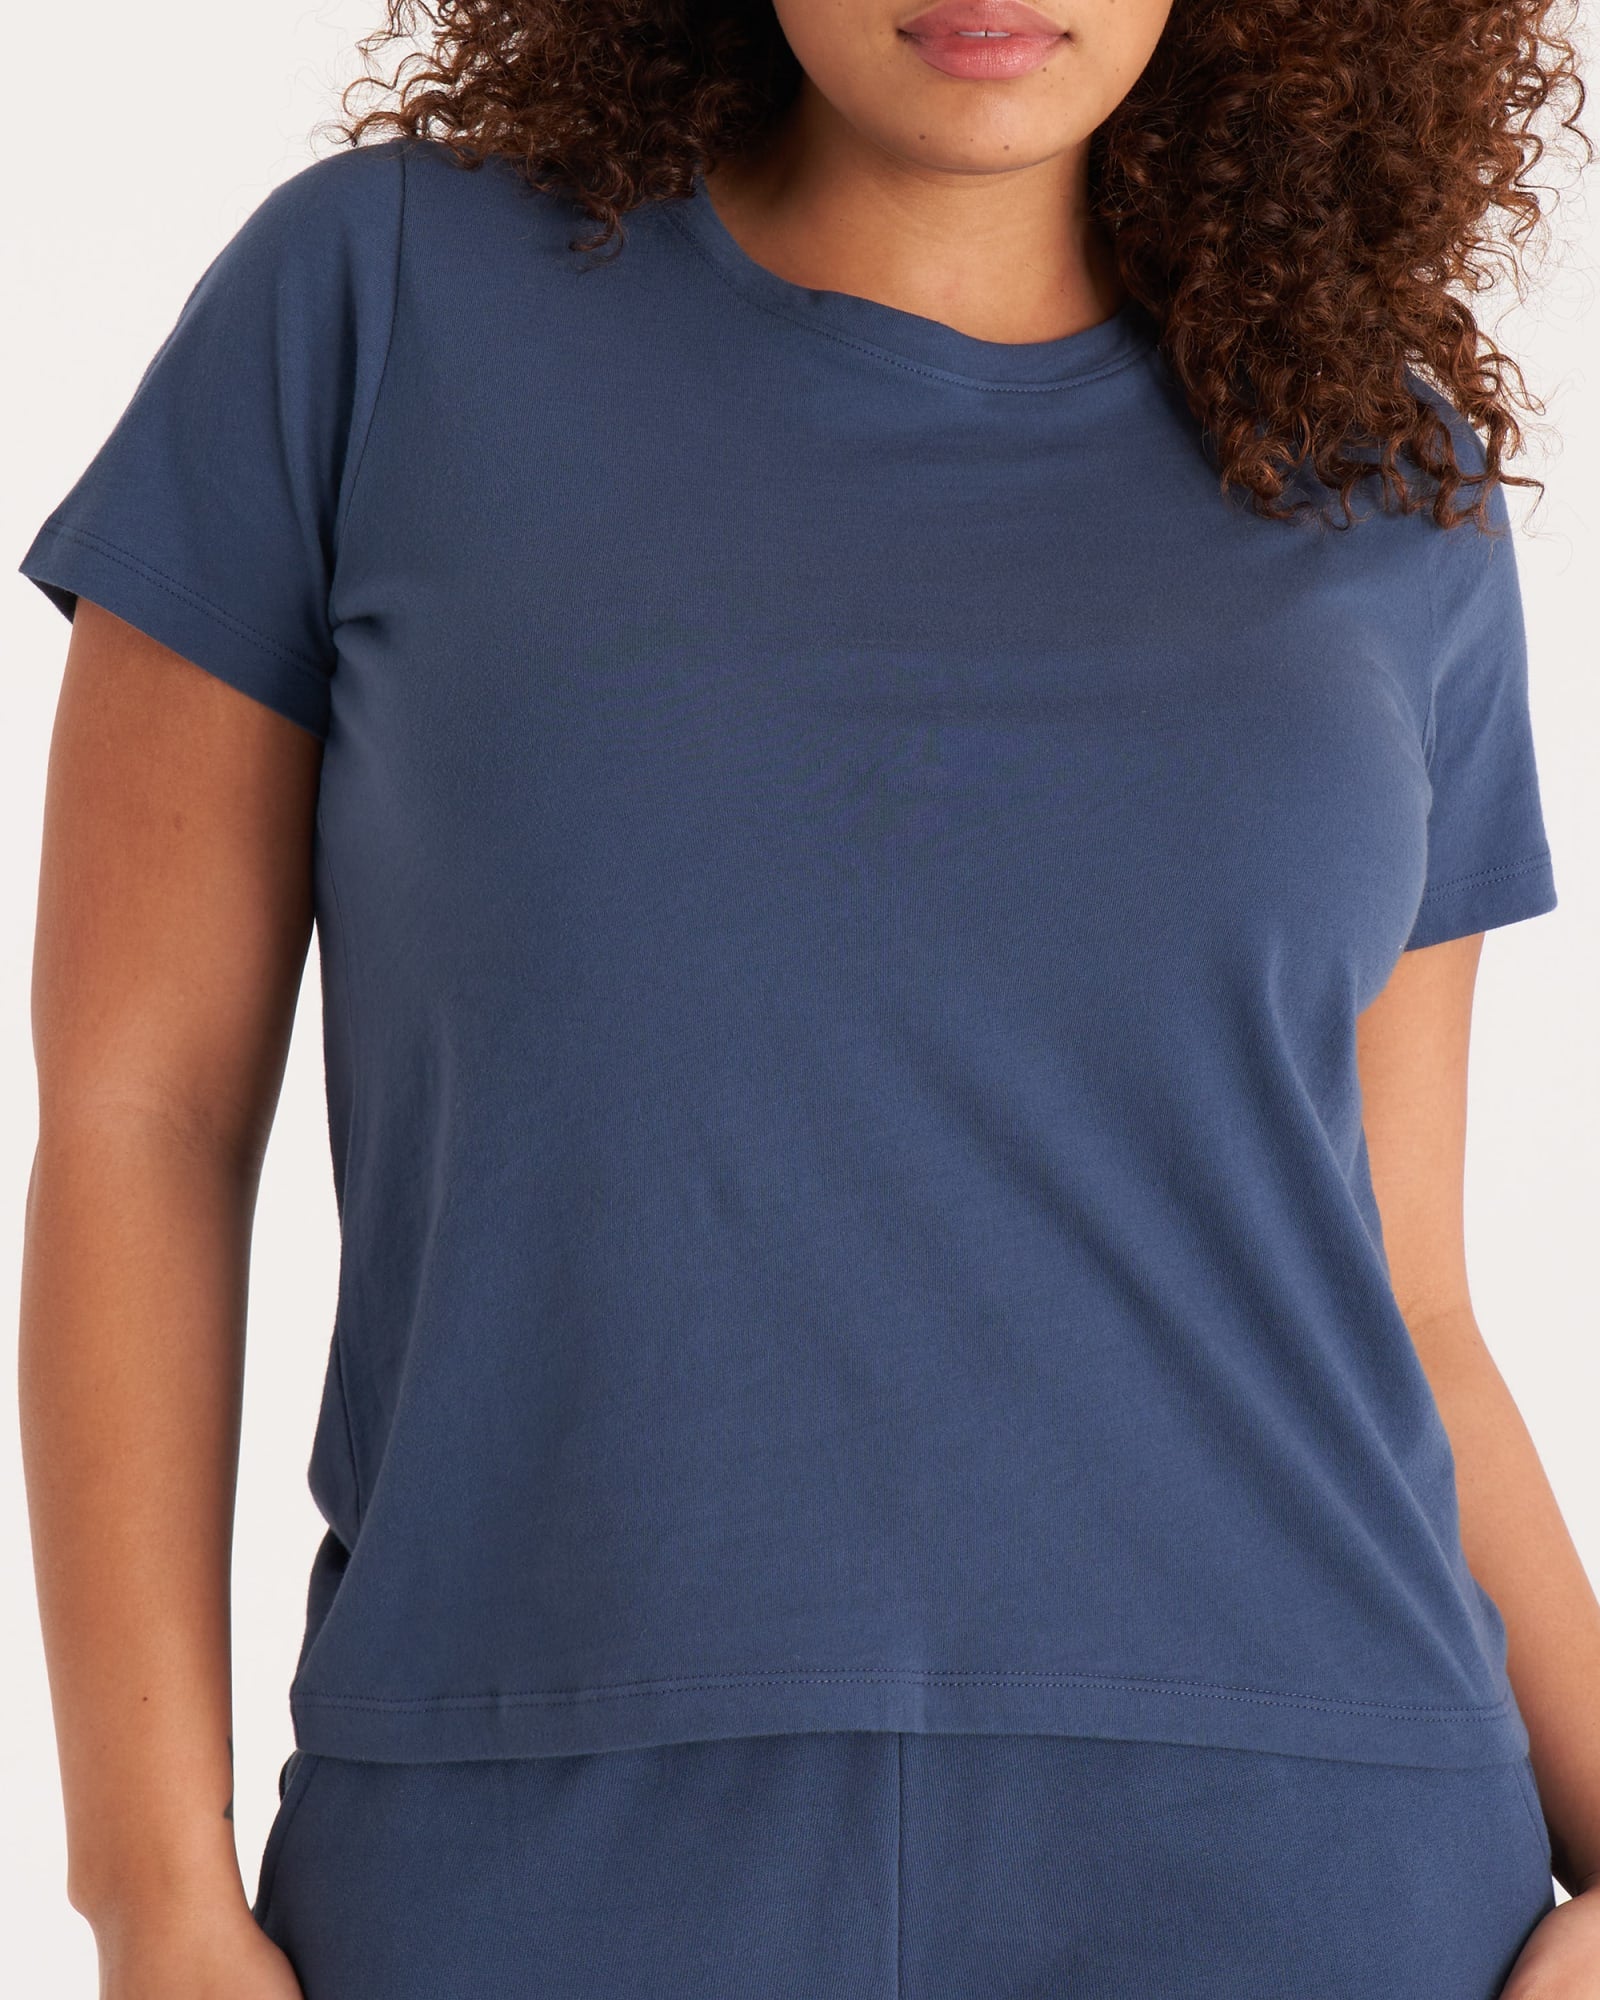 Women's Breathable T Shirts